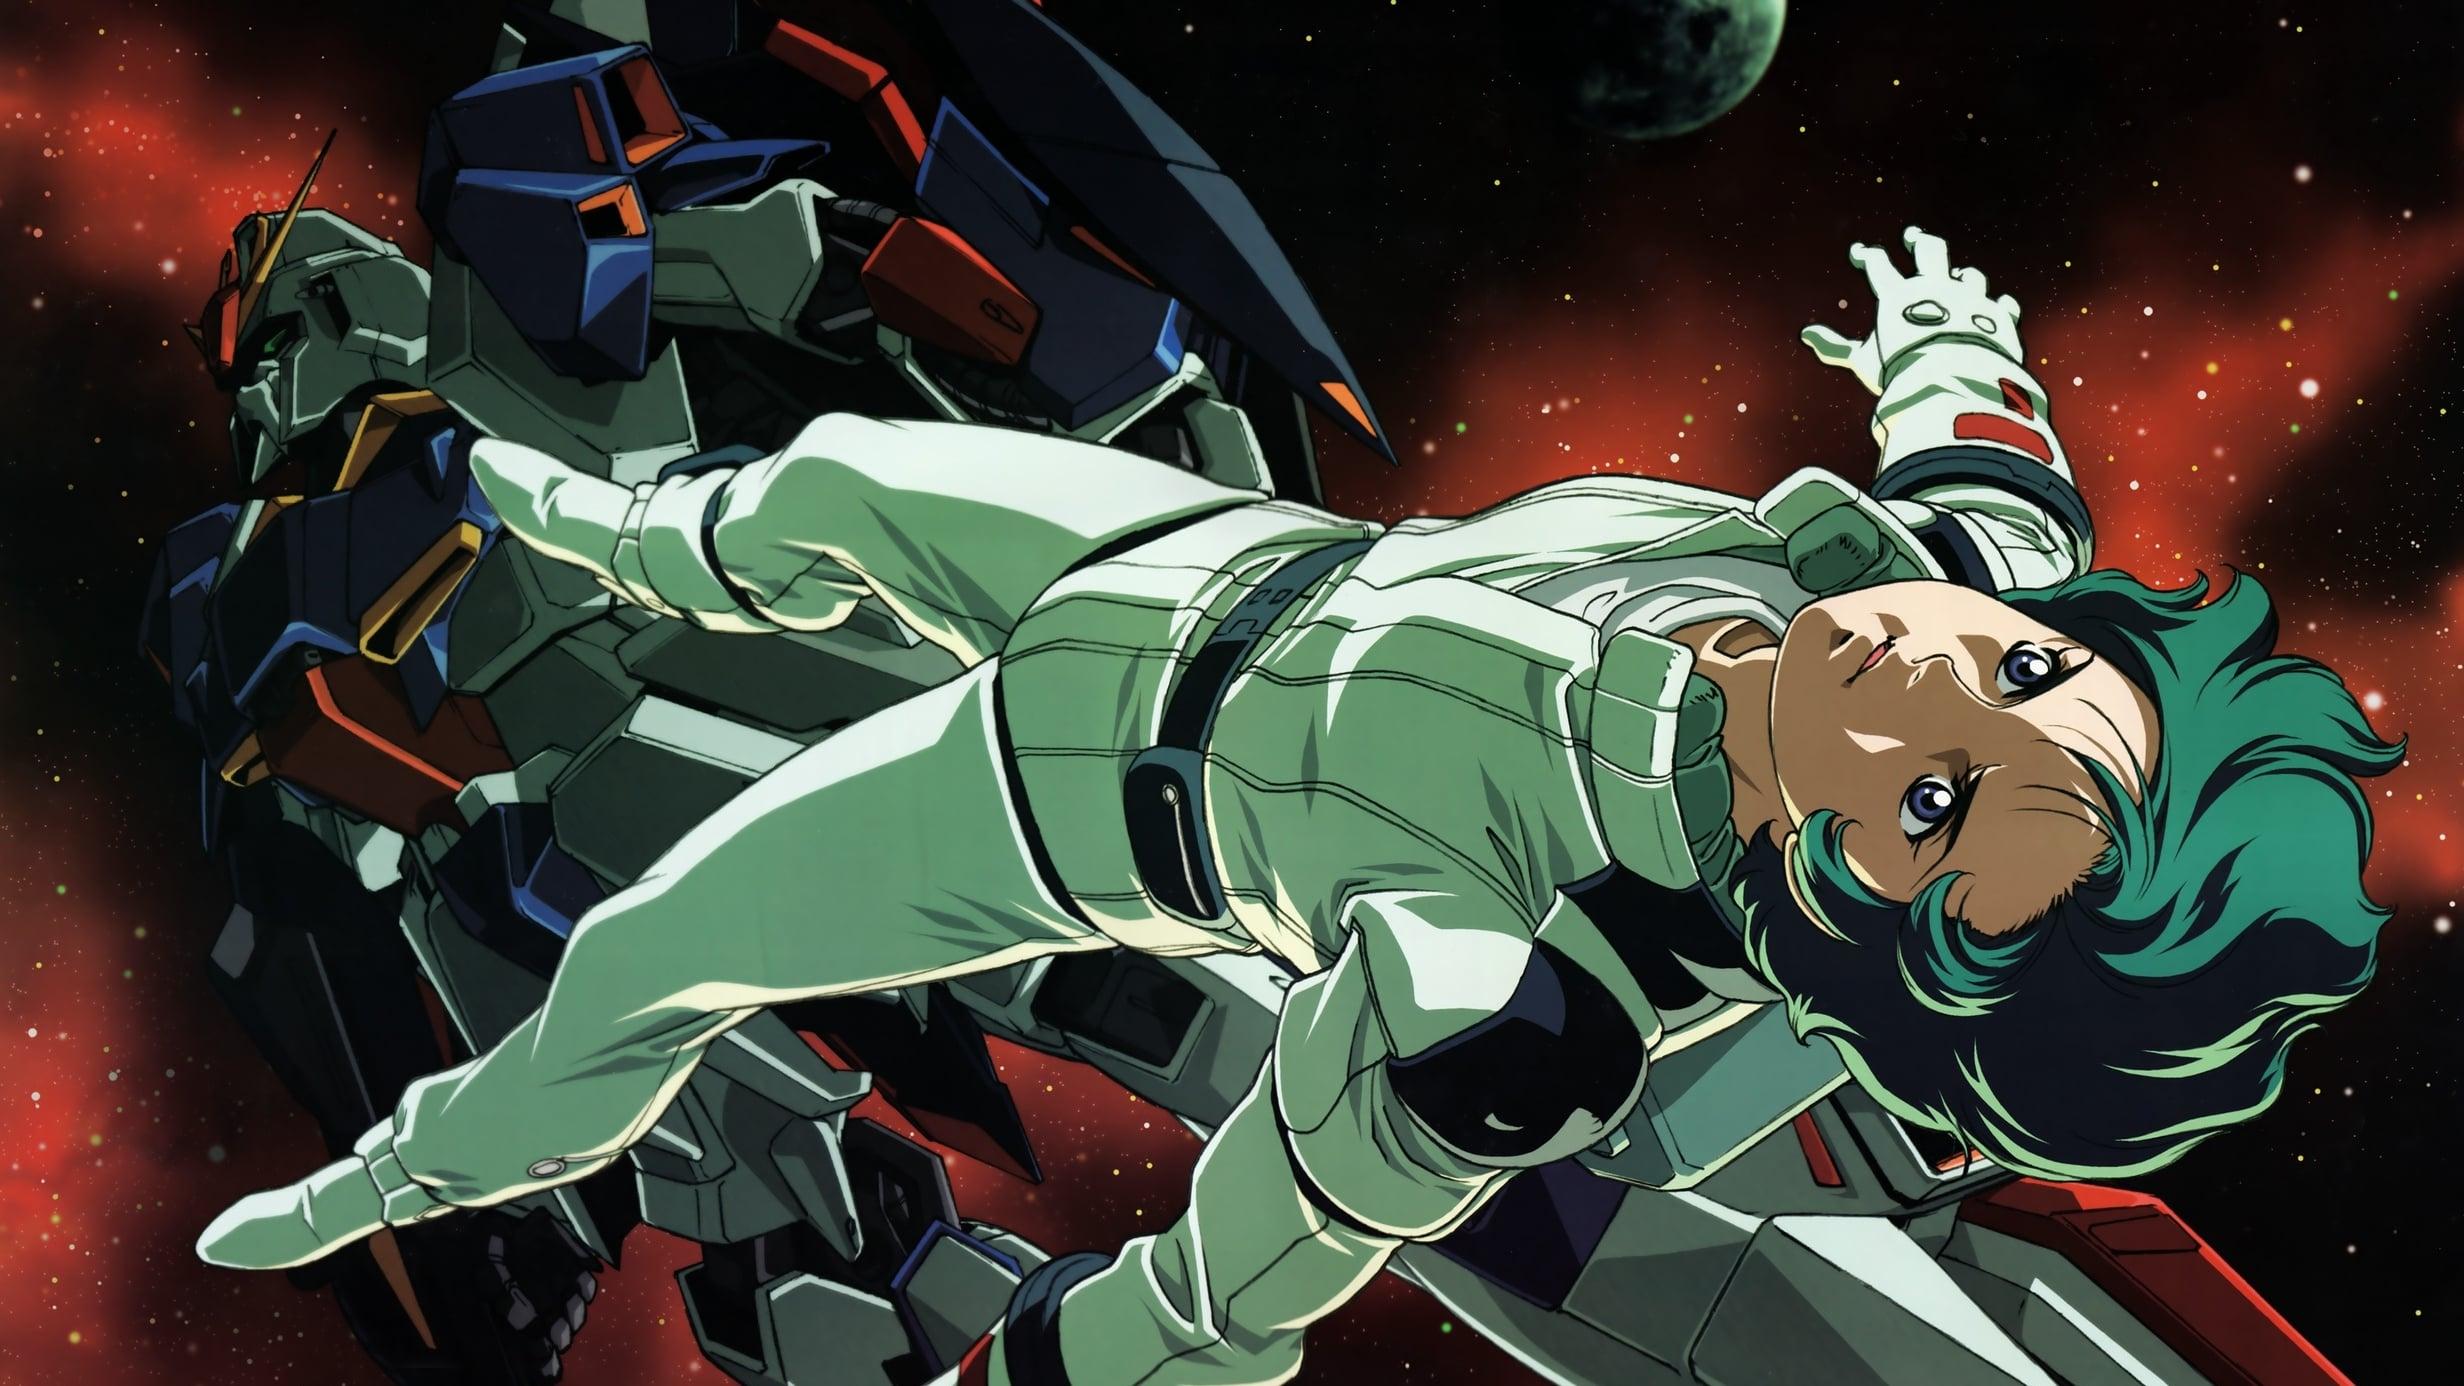 Mobile Suit Zeta Gundam - A New Translation III: Love is the Pulse of the Stars backdrop